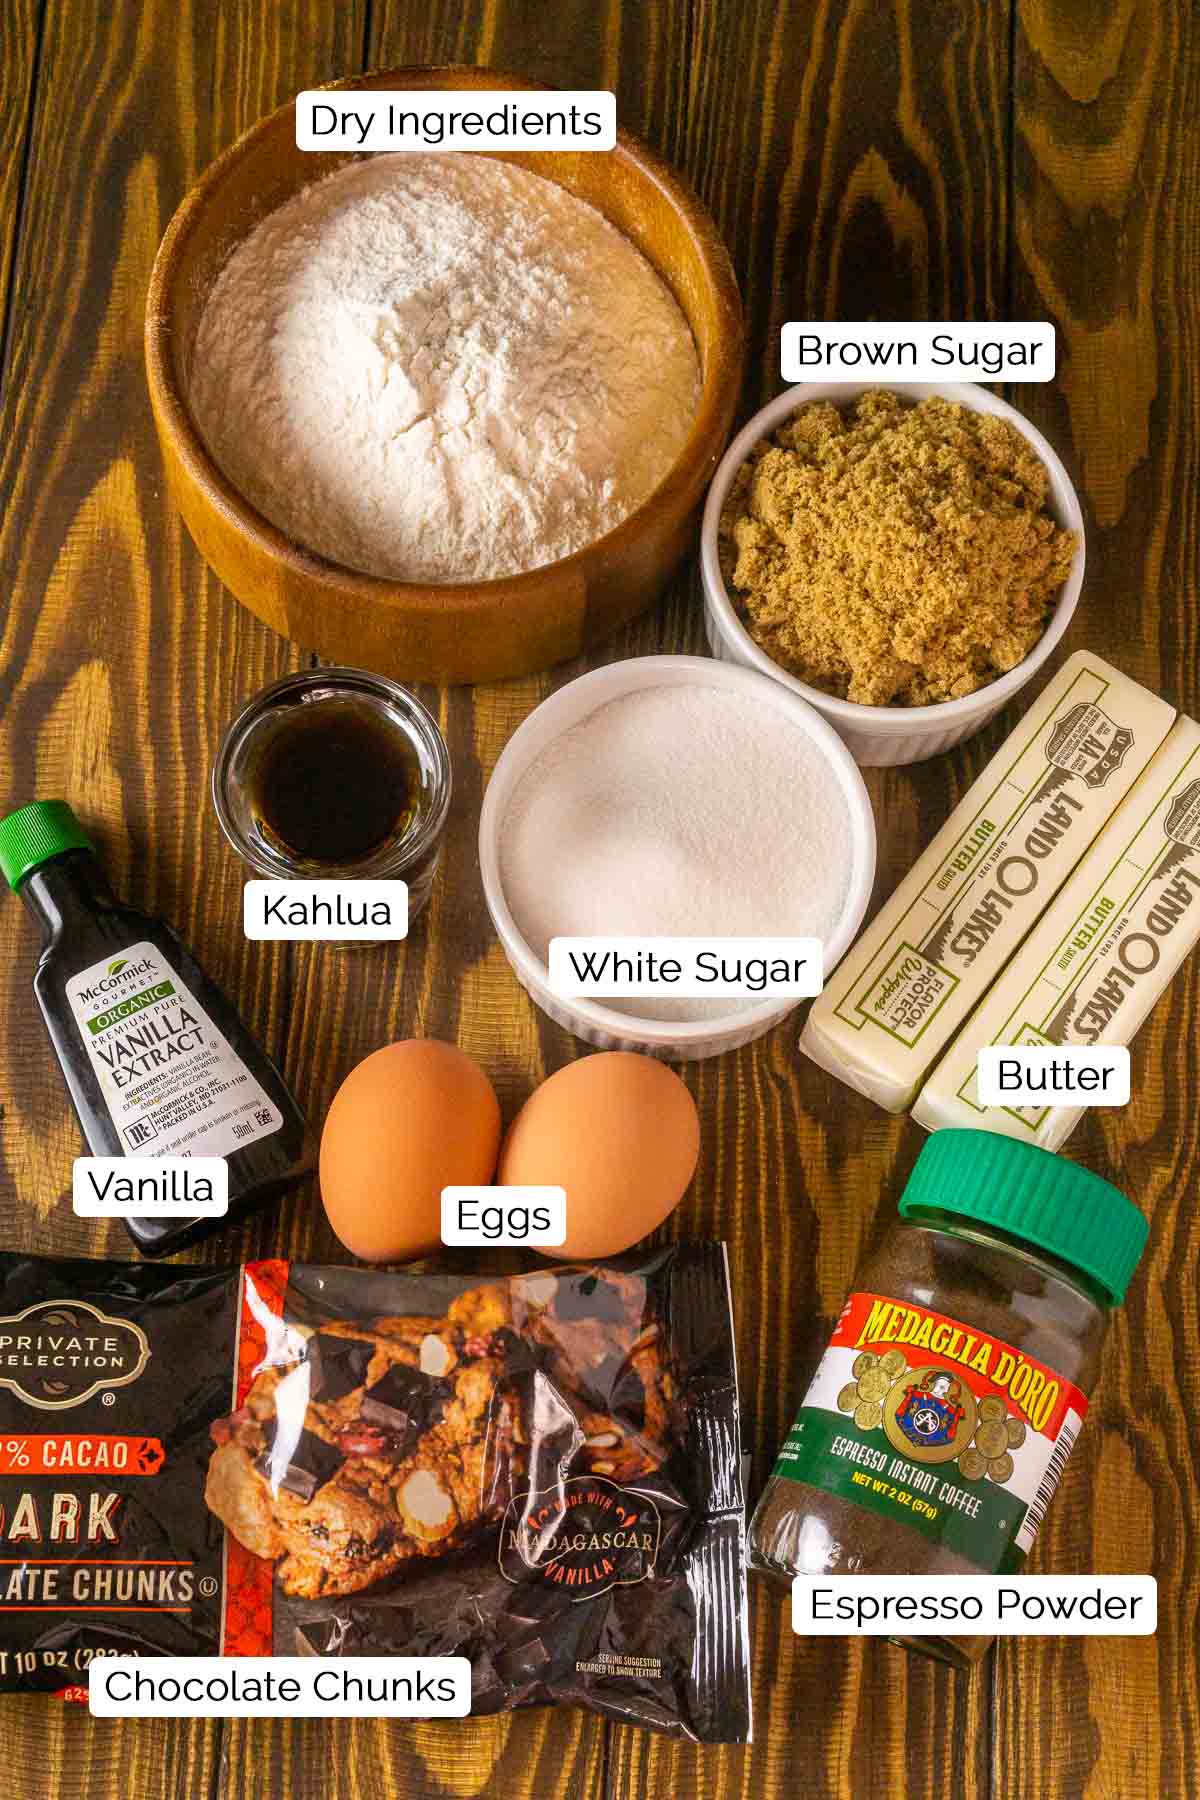 The cookie ingredients on a brown wooden board with black and white labels by each item.